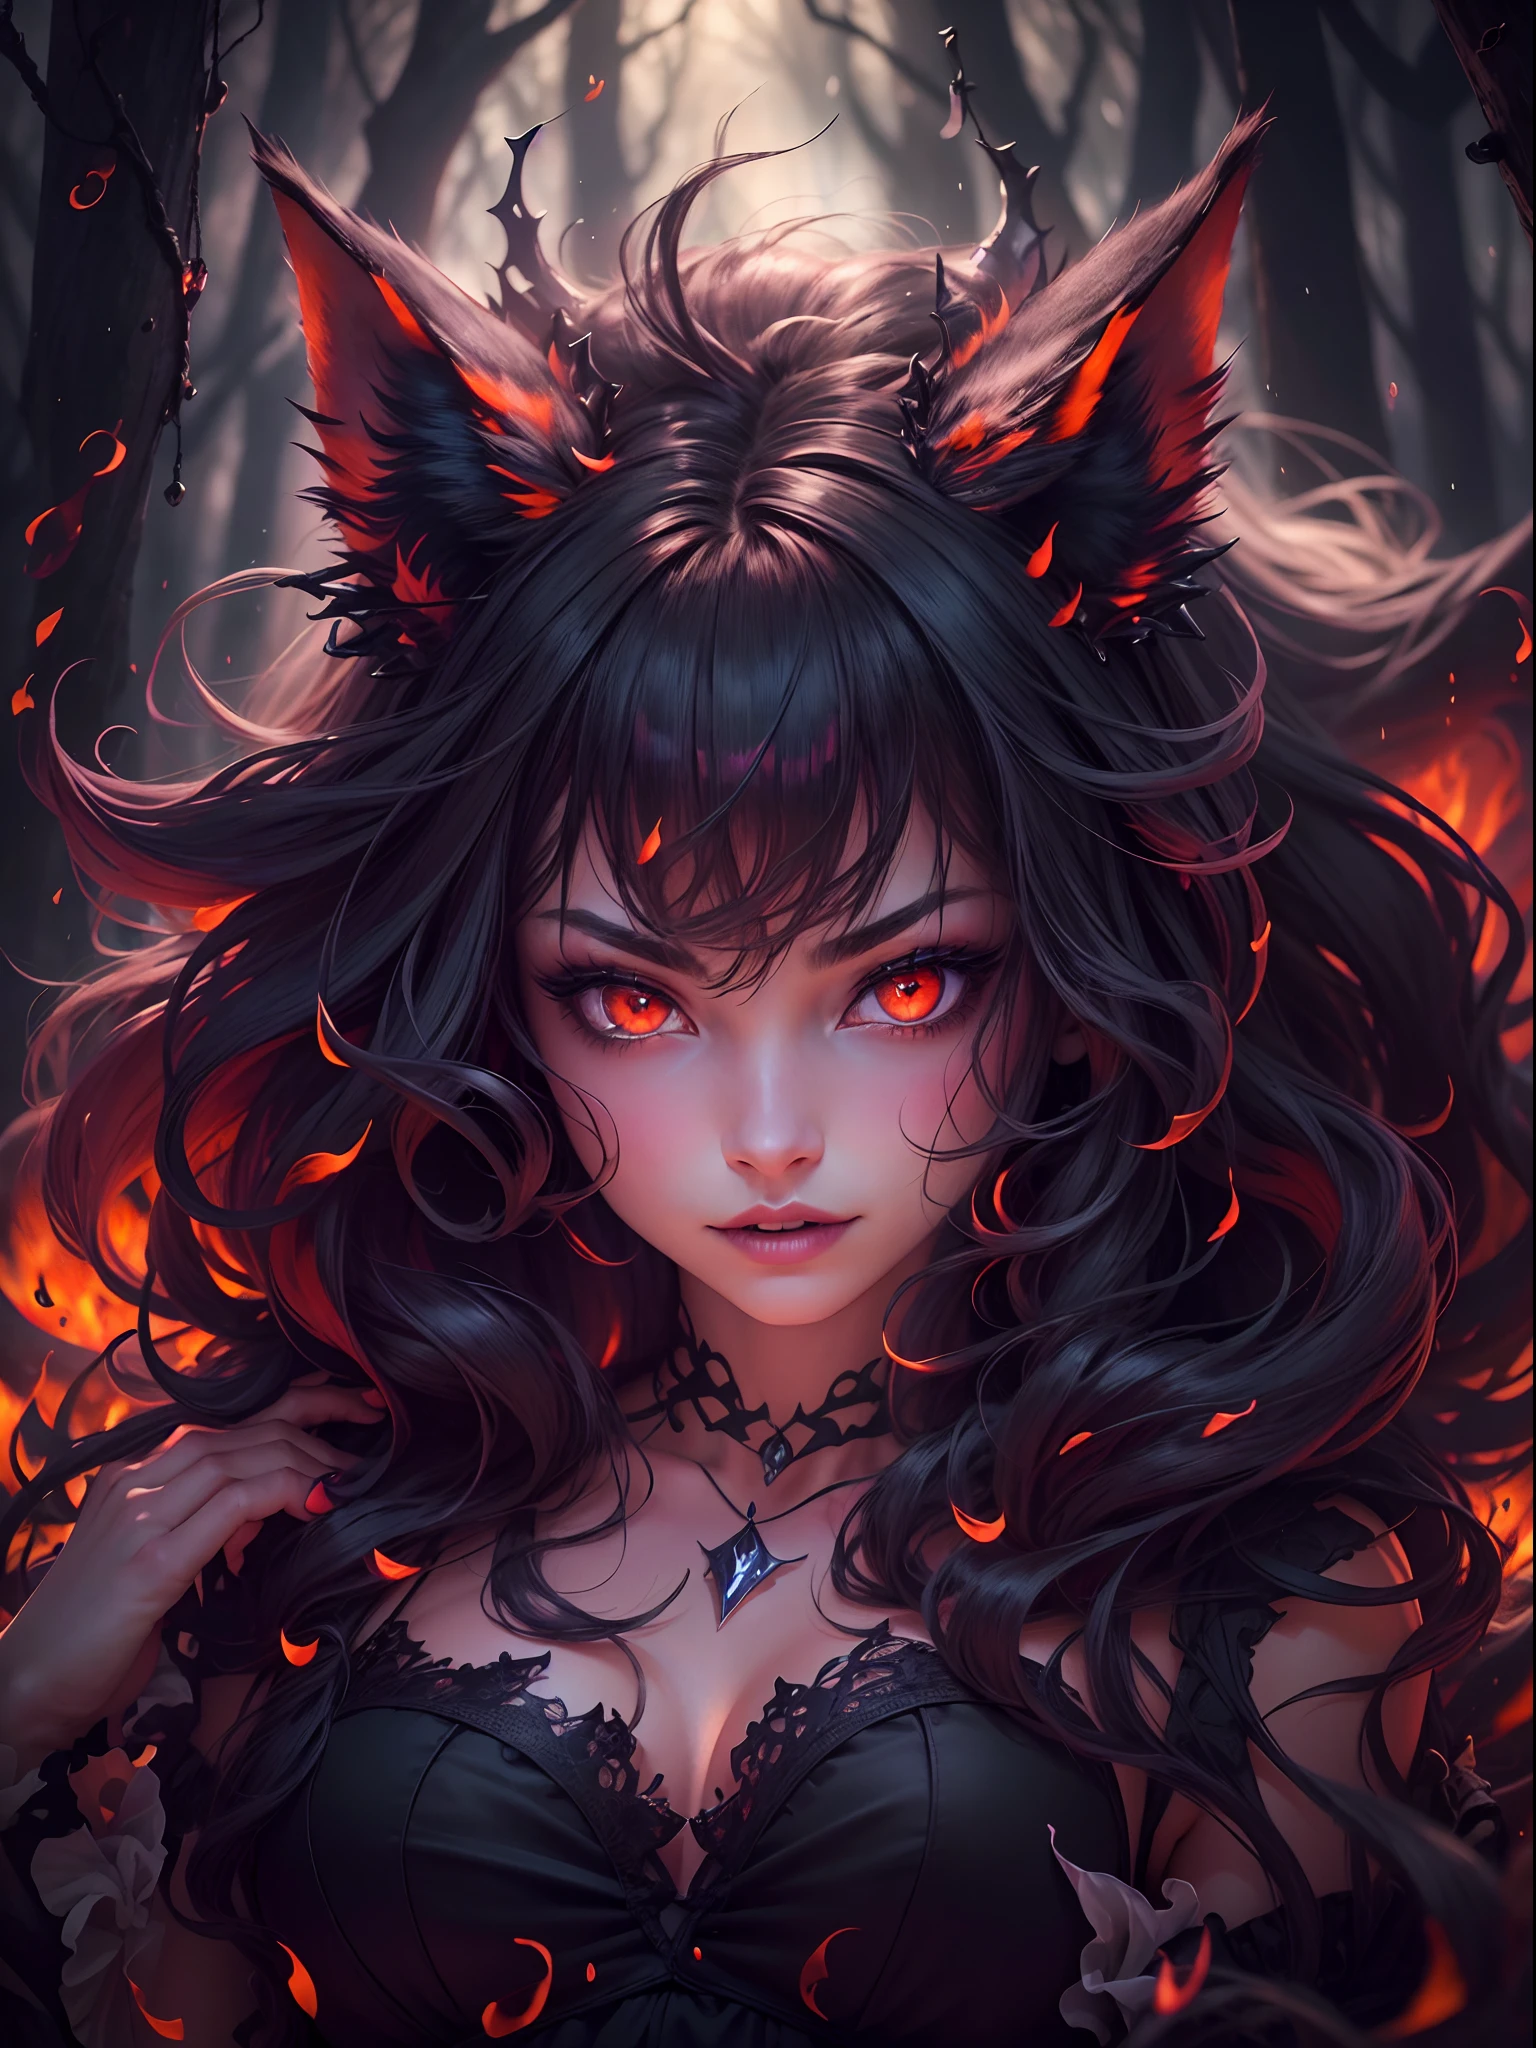 (best quality,4k,8k,highres,masterpiece:1.2),ultra-detailed,(realistic,photorealistic,photo-realistic:1.37),A devil girl with cute fluffy wolf as a devil pet,illustration,dark art,gothic,red color palette,warm lighting,fiery background,glowing eyes,horns,tail,sharp teeth,demonic smile,beautiful detailed eyes,beautiful detailed lips,flawless porcelain skin,dark long hair,black dress,fierce expression,mischievous smirk,wolf ears,furry wolf paws,twisted devil's horns,piercing stare,magic flames,spooky atmosphere,floating crystals,enchanted forest,moonlight,nighttime scene,dramatic shadows,creepy vines,twisted trees,thunderstorm,rainy weather,evil aura